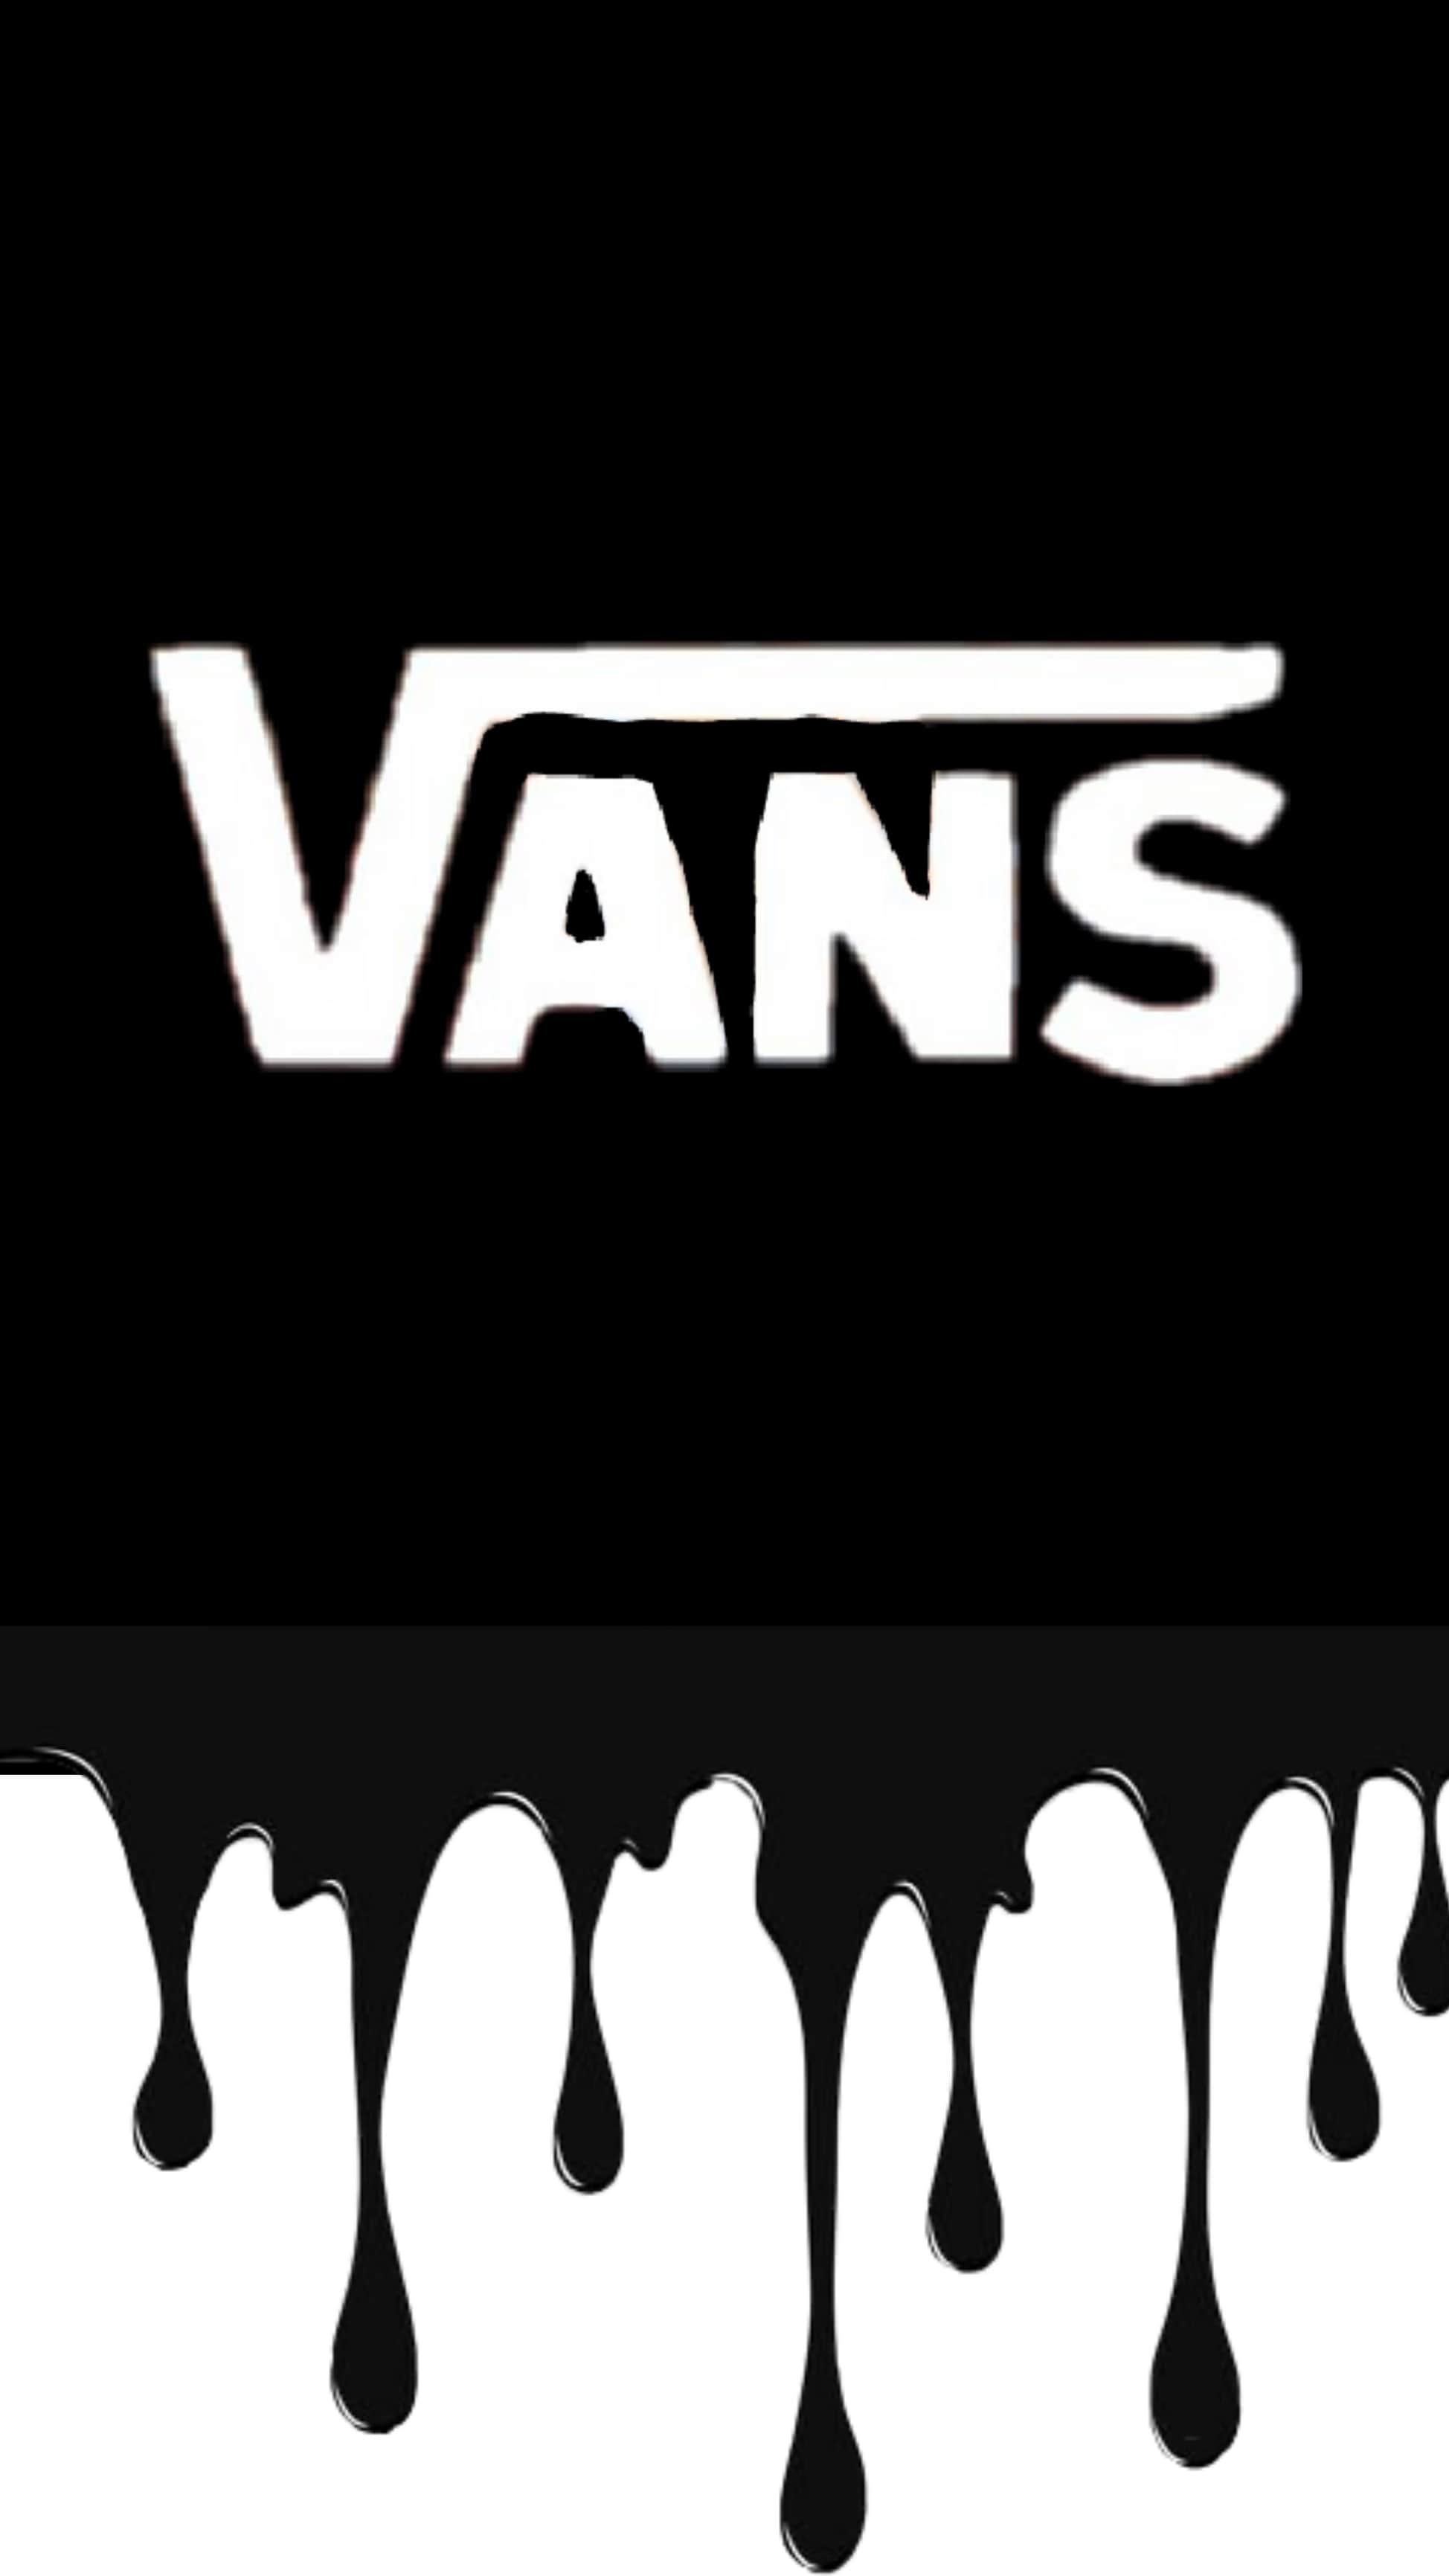 Drippy Vans Wallpaper Awesome HD